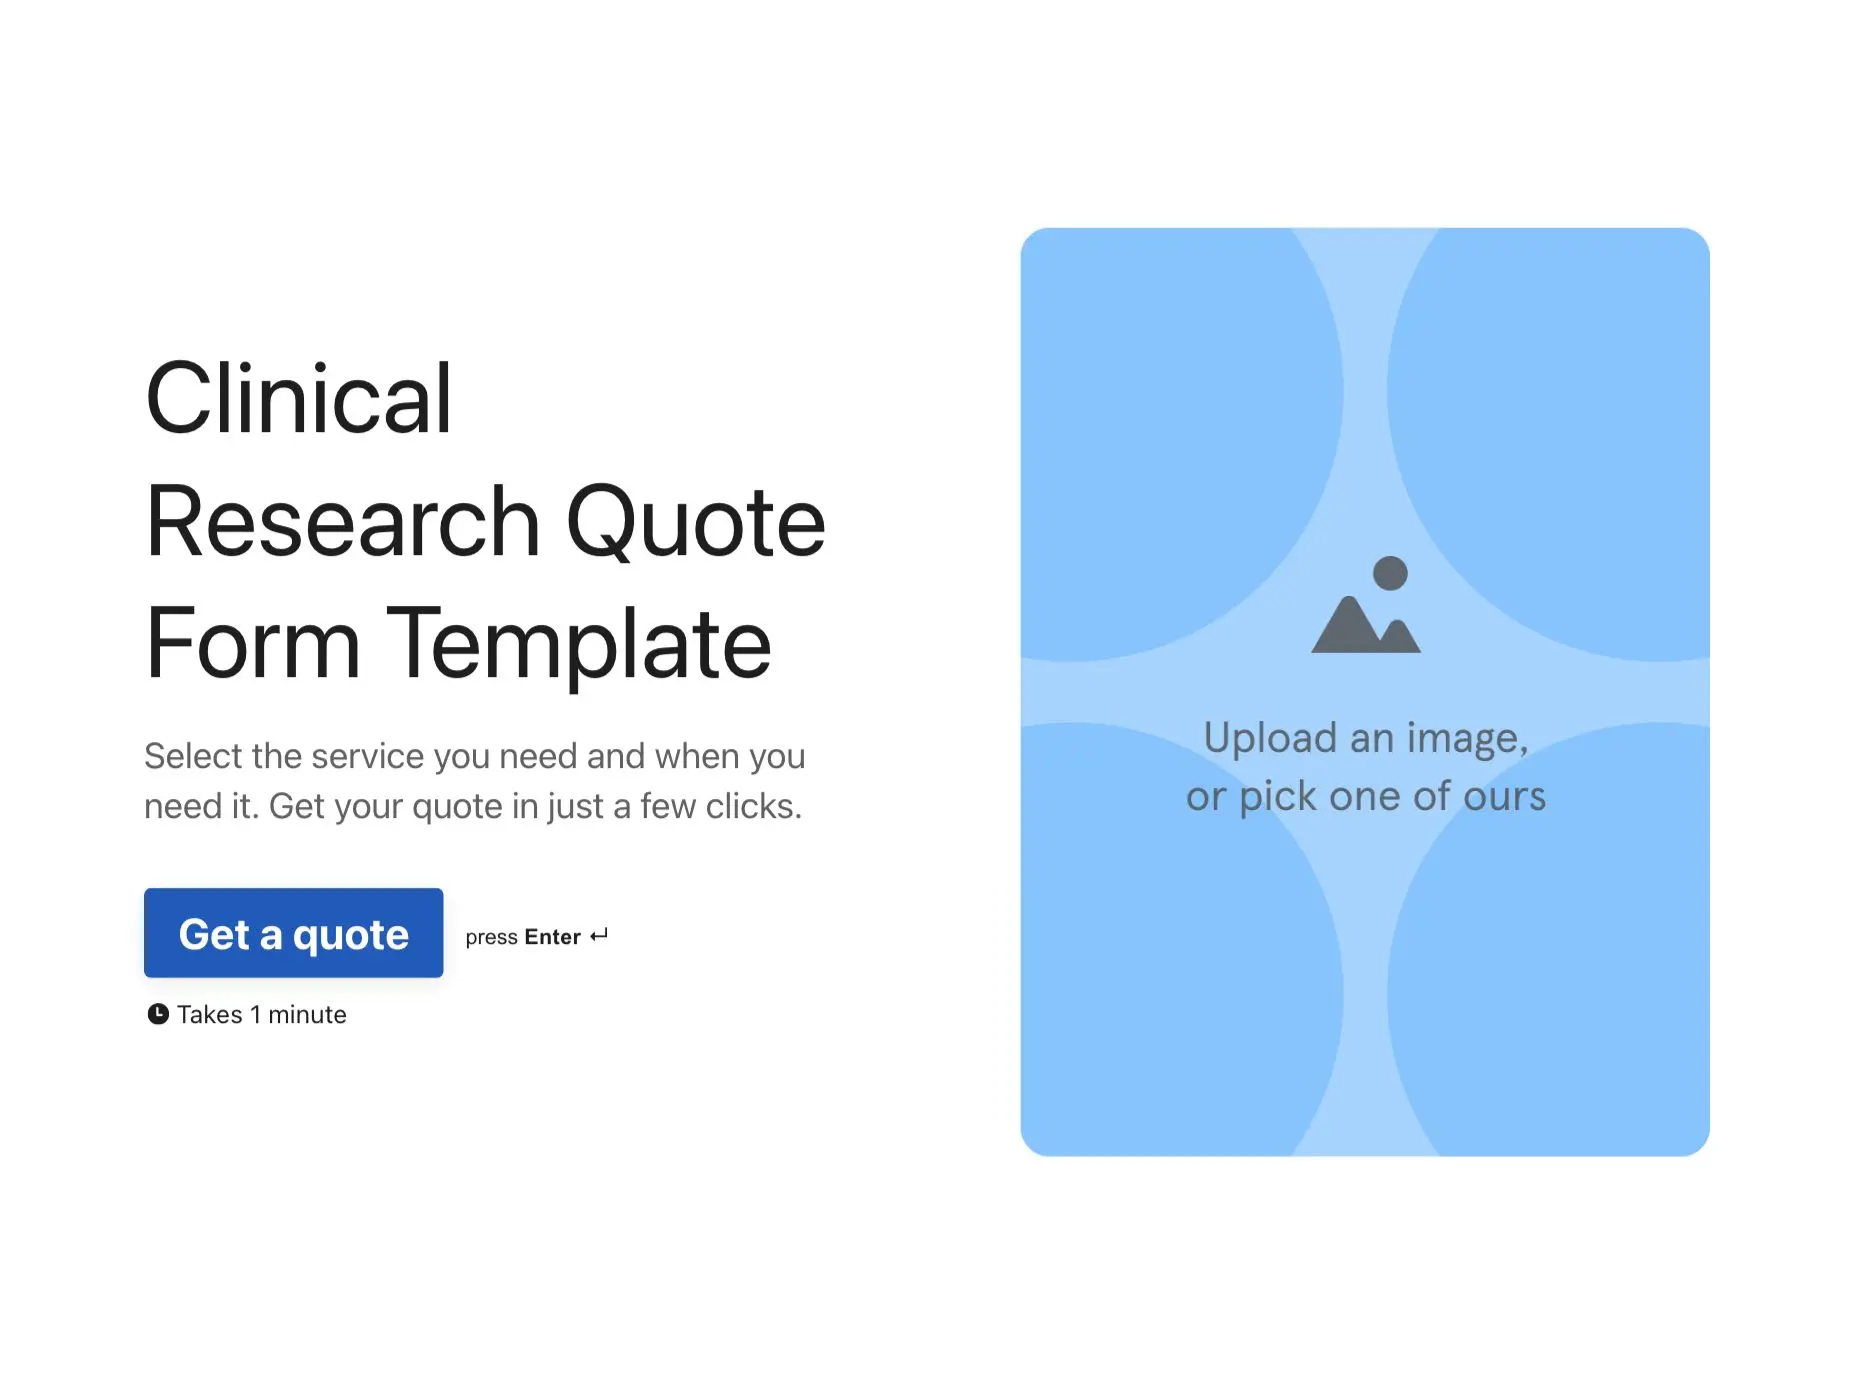 Clinical Research Quote Form Template Hero